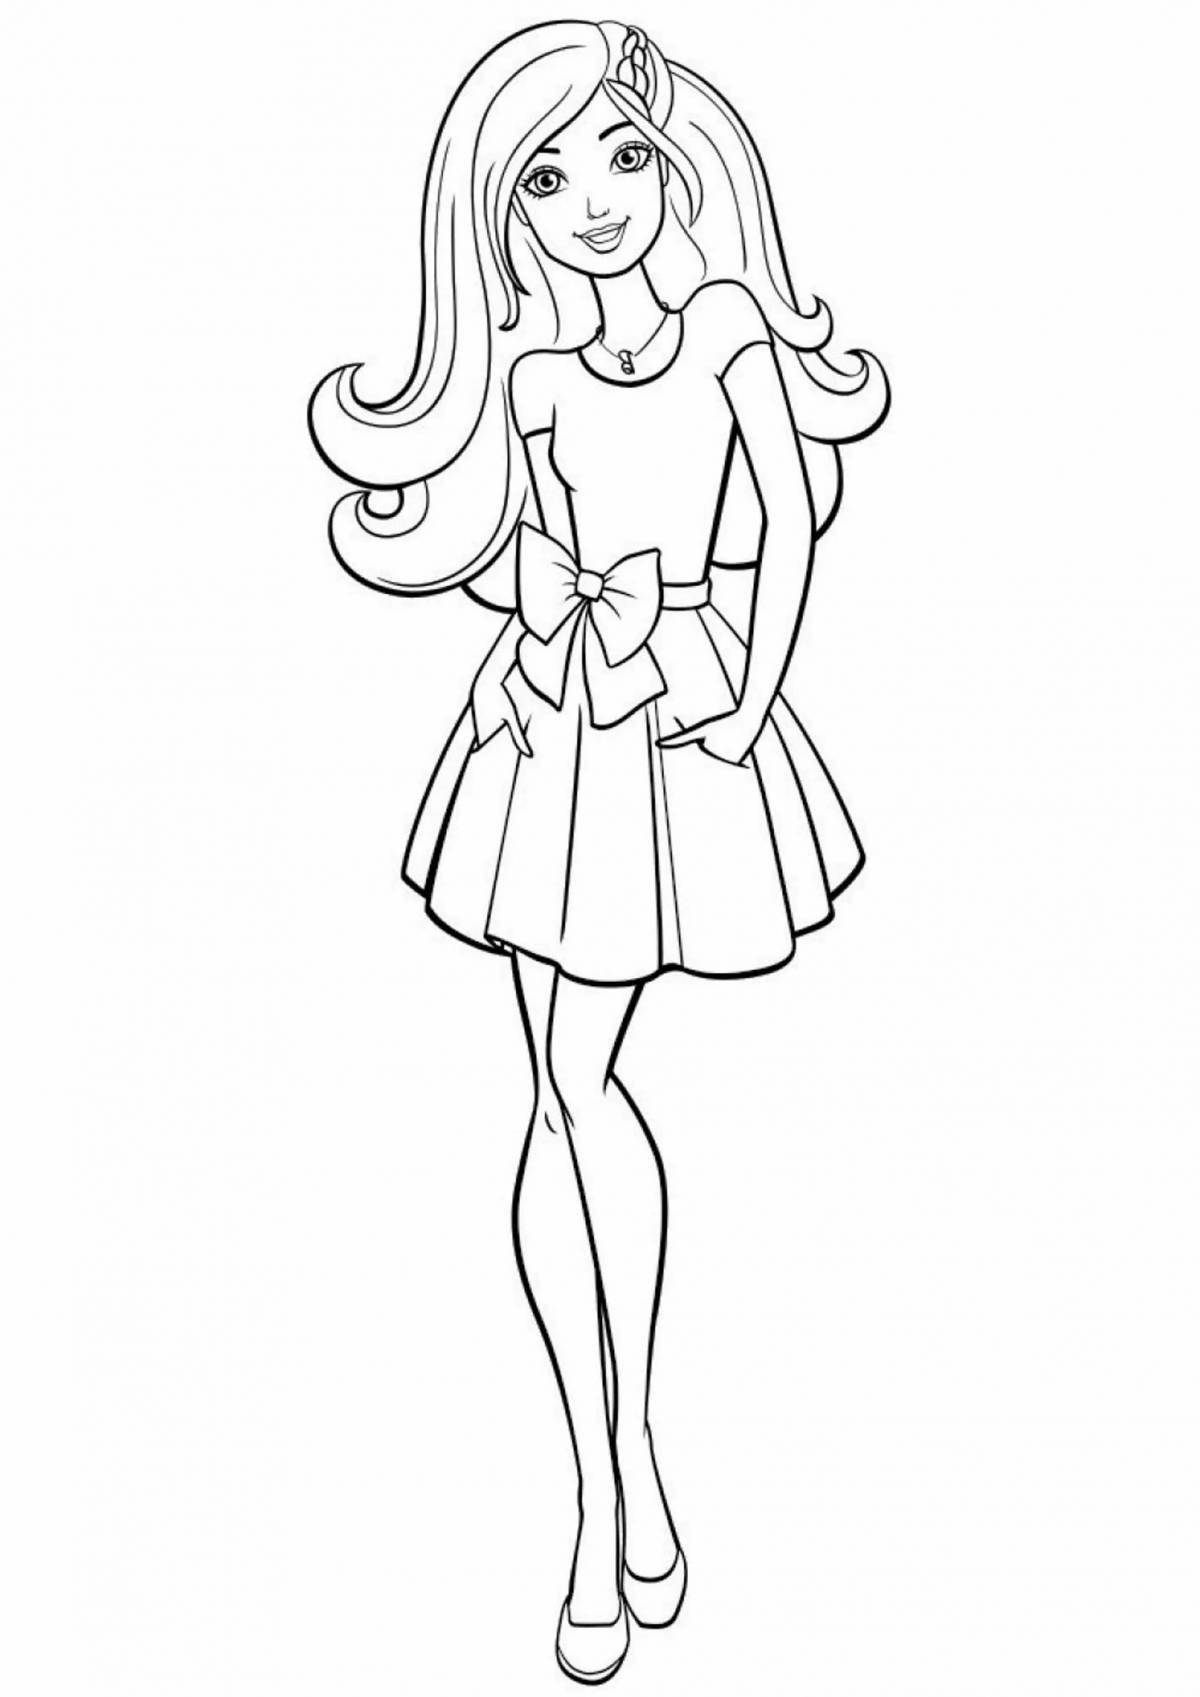 Sparkling barb coloring book